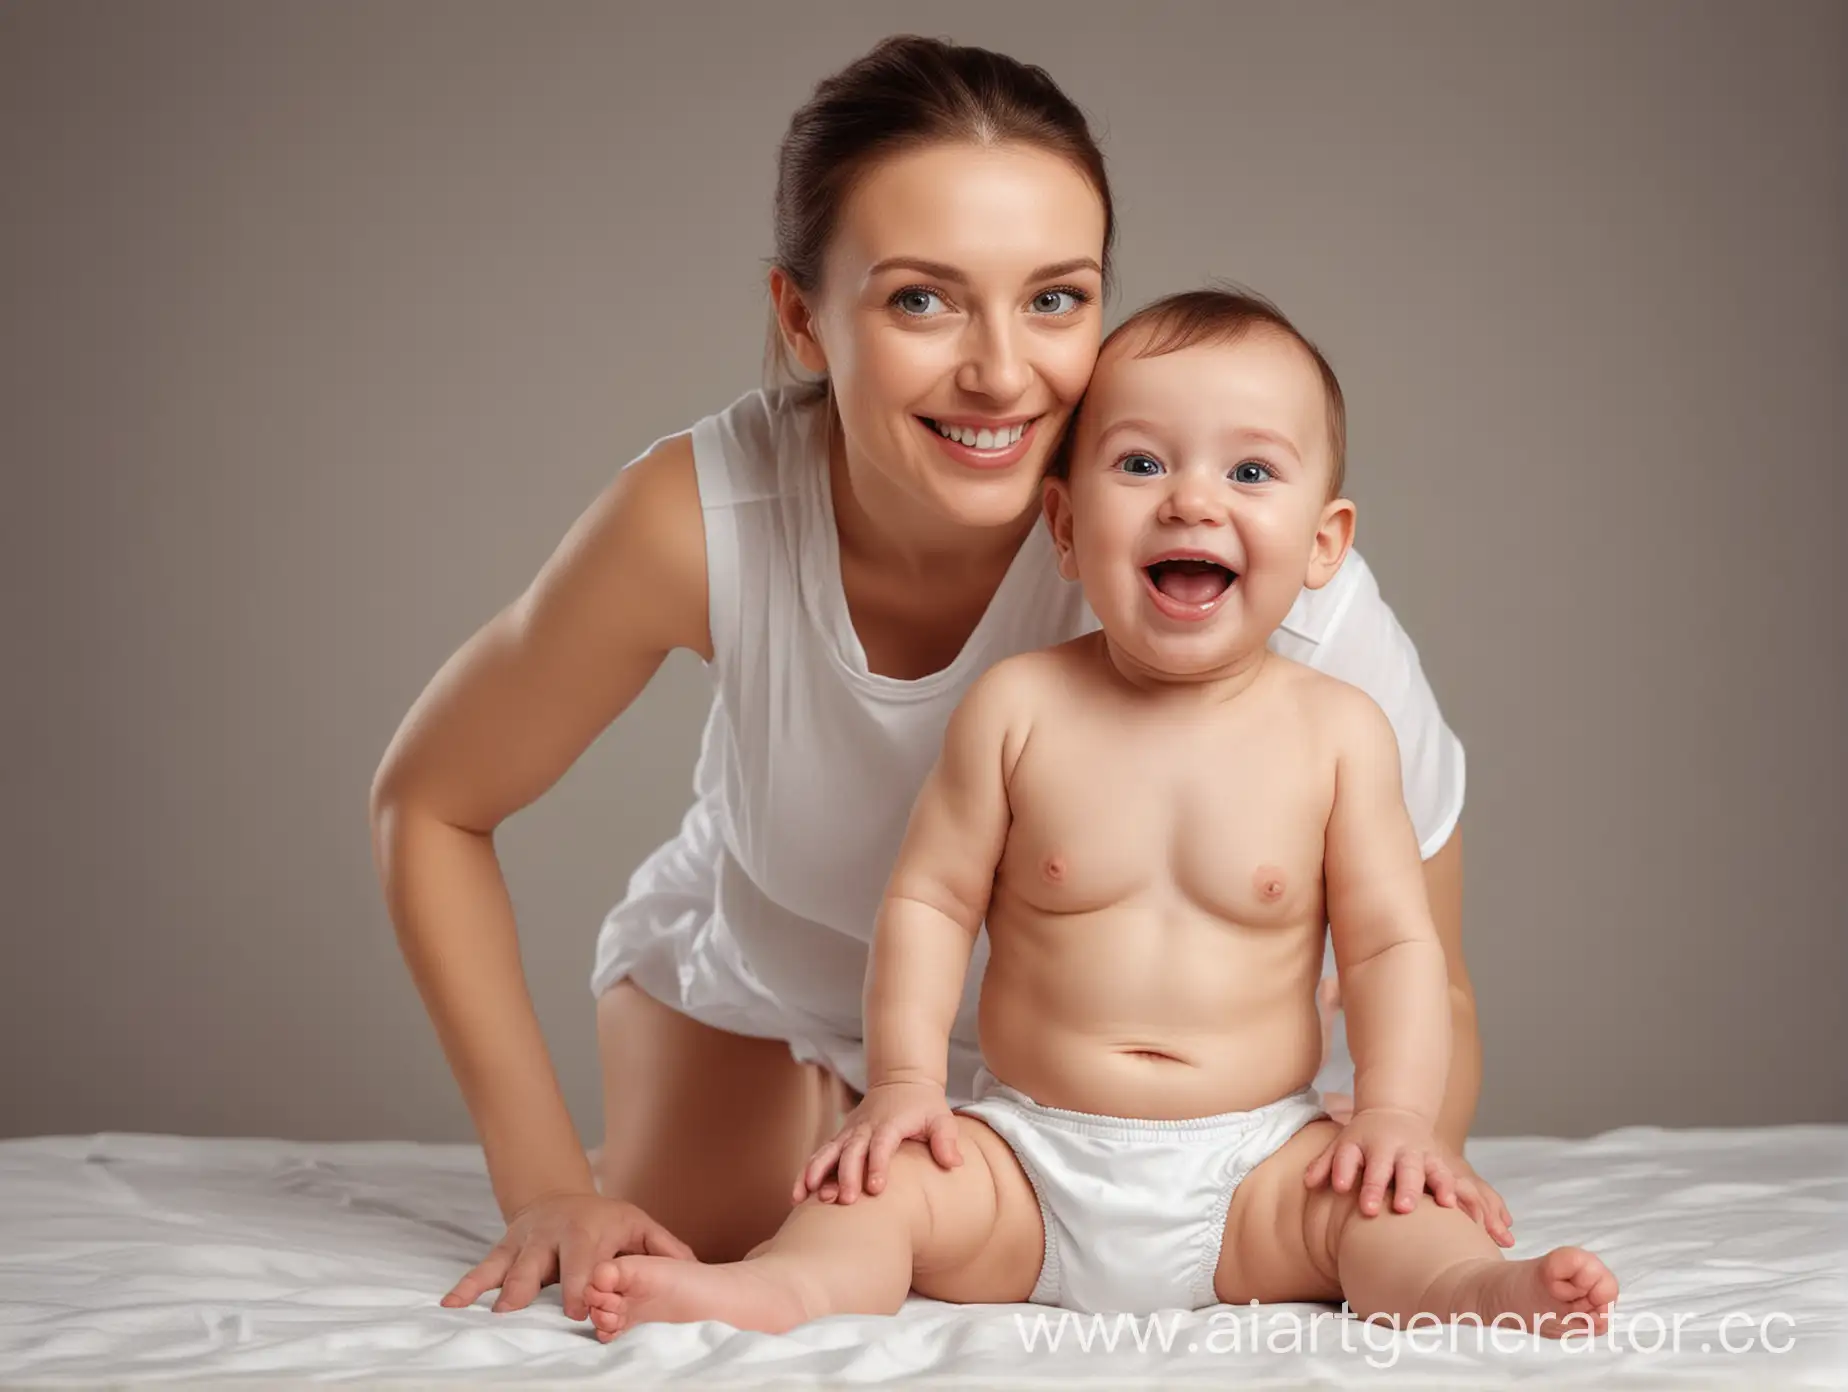 Happy-Baby-in-Diapers-Bonding-with-Smiling-Mother-Realistic-Family-Moment-for-Website-Banner